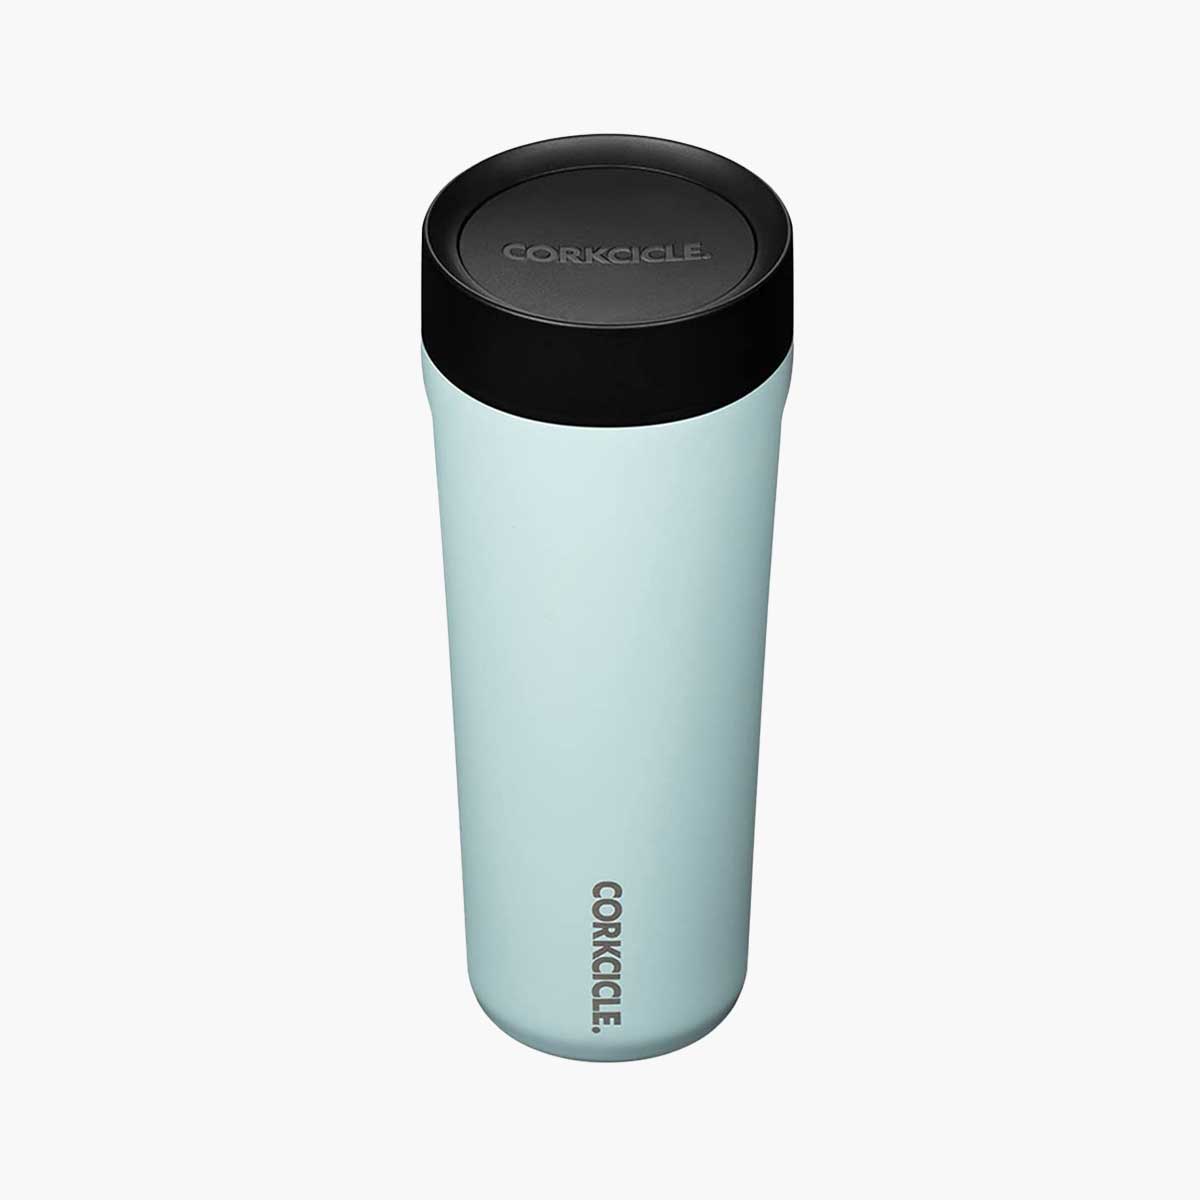 A Corkcicle commuter mug, one of Oprah's 12 favorite kitchen gifts for 2021.